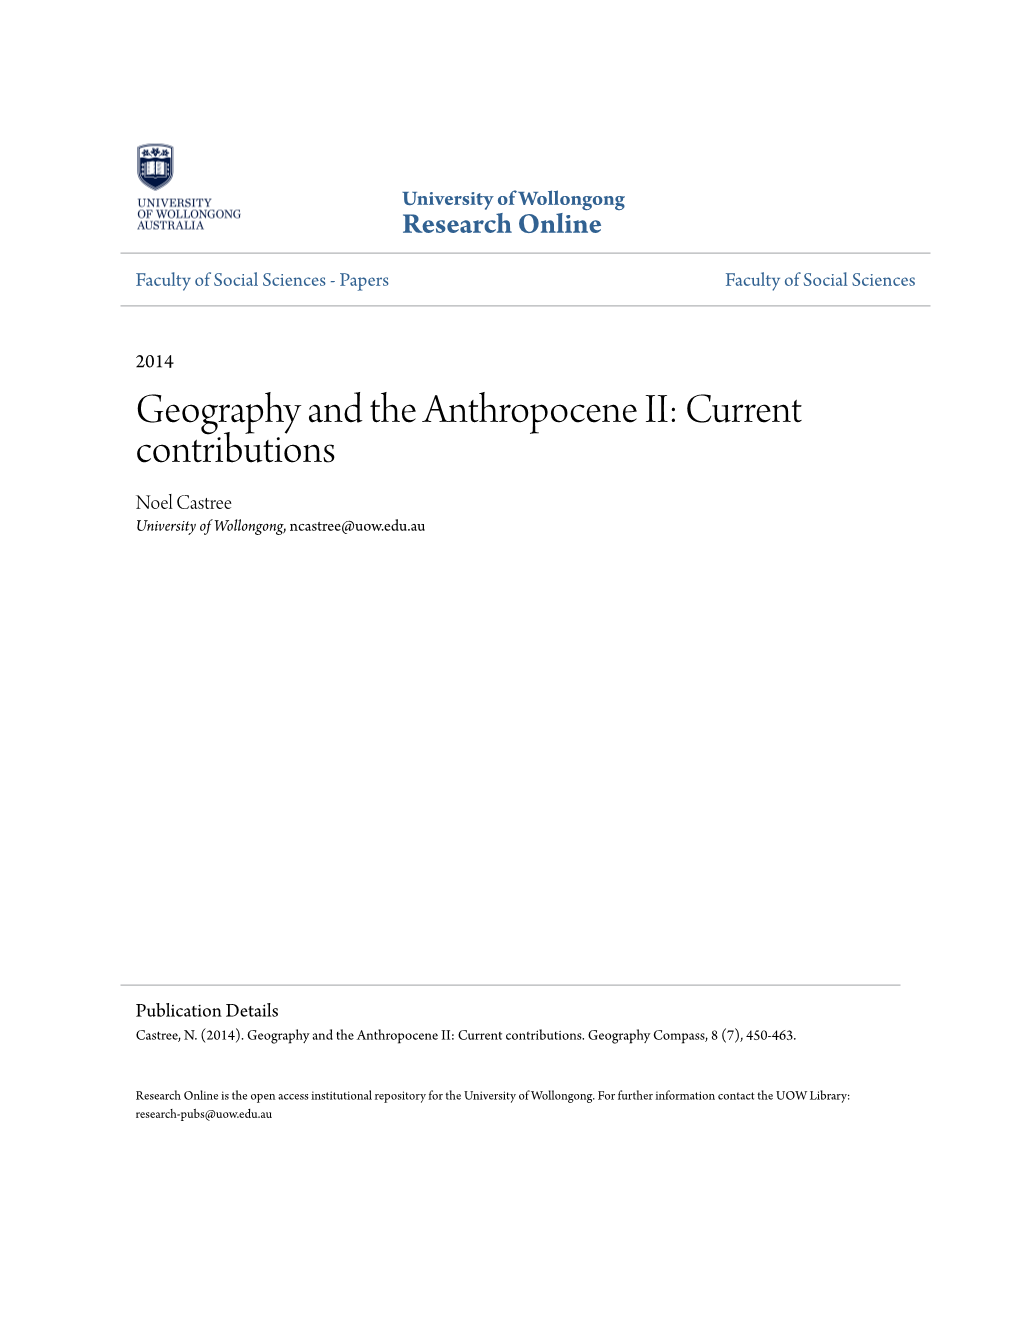 Geography and the Anthropocene II: Current Contributions Noel Castree University of Wollongong, Ncastree@Uow.Edu.Au